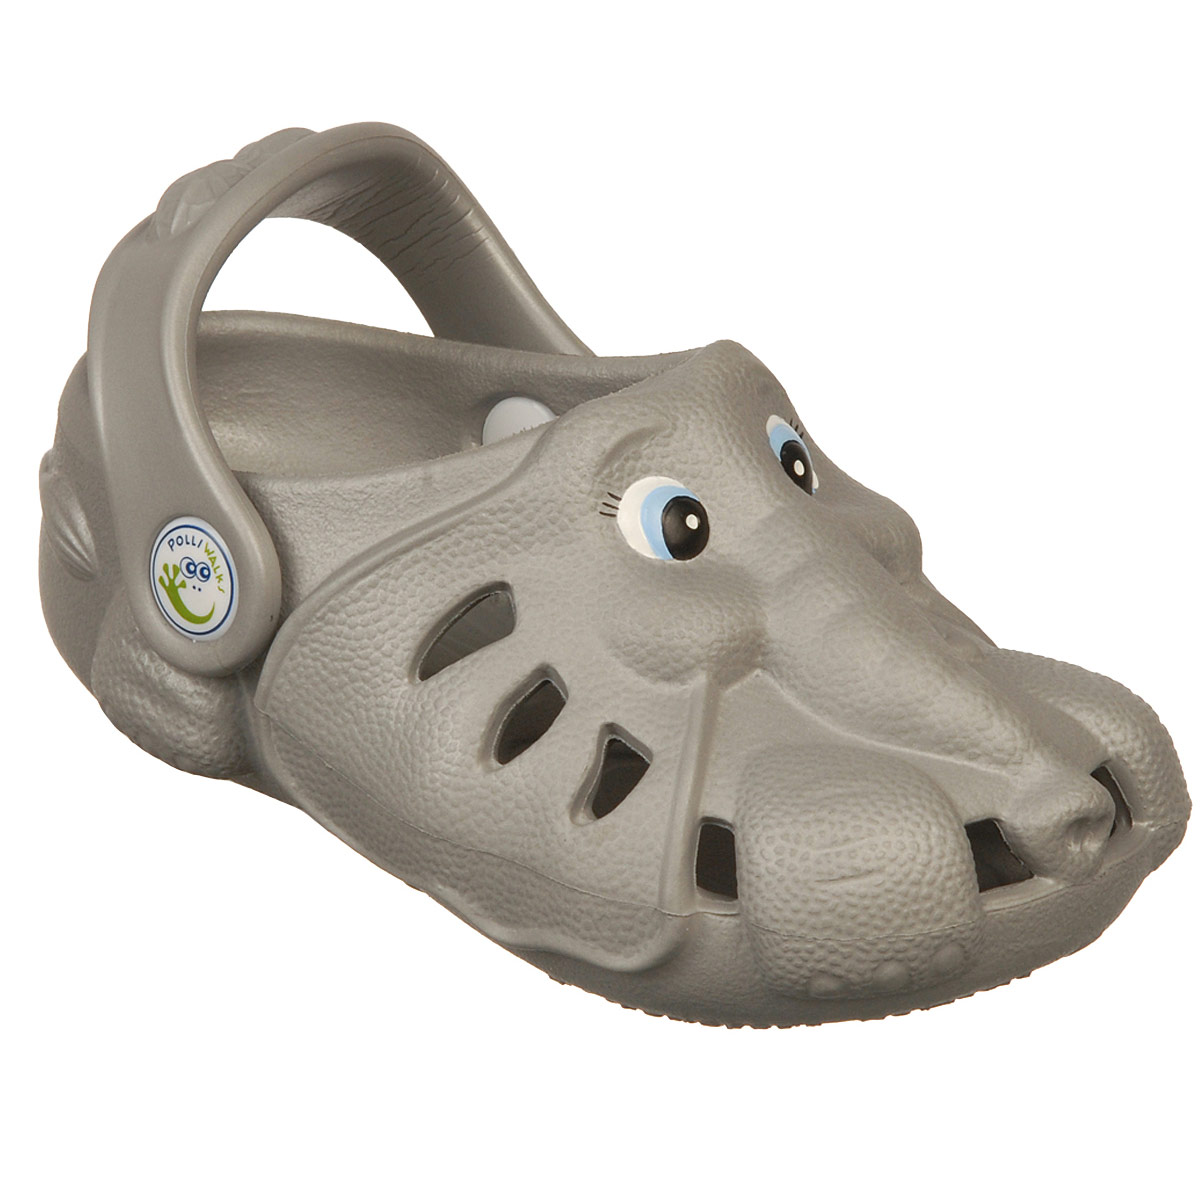 Polliwalks : Toddler shoes Ethan the ELEPHANT Gray # 10